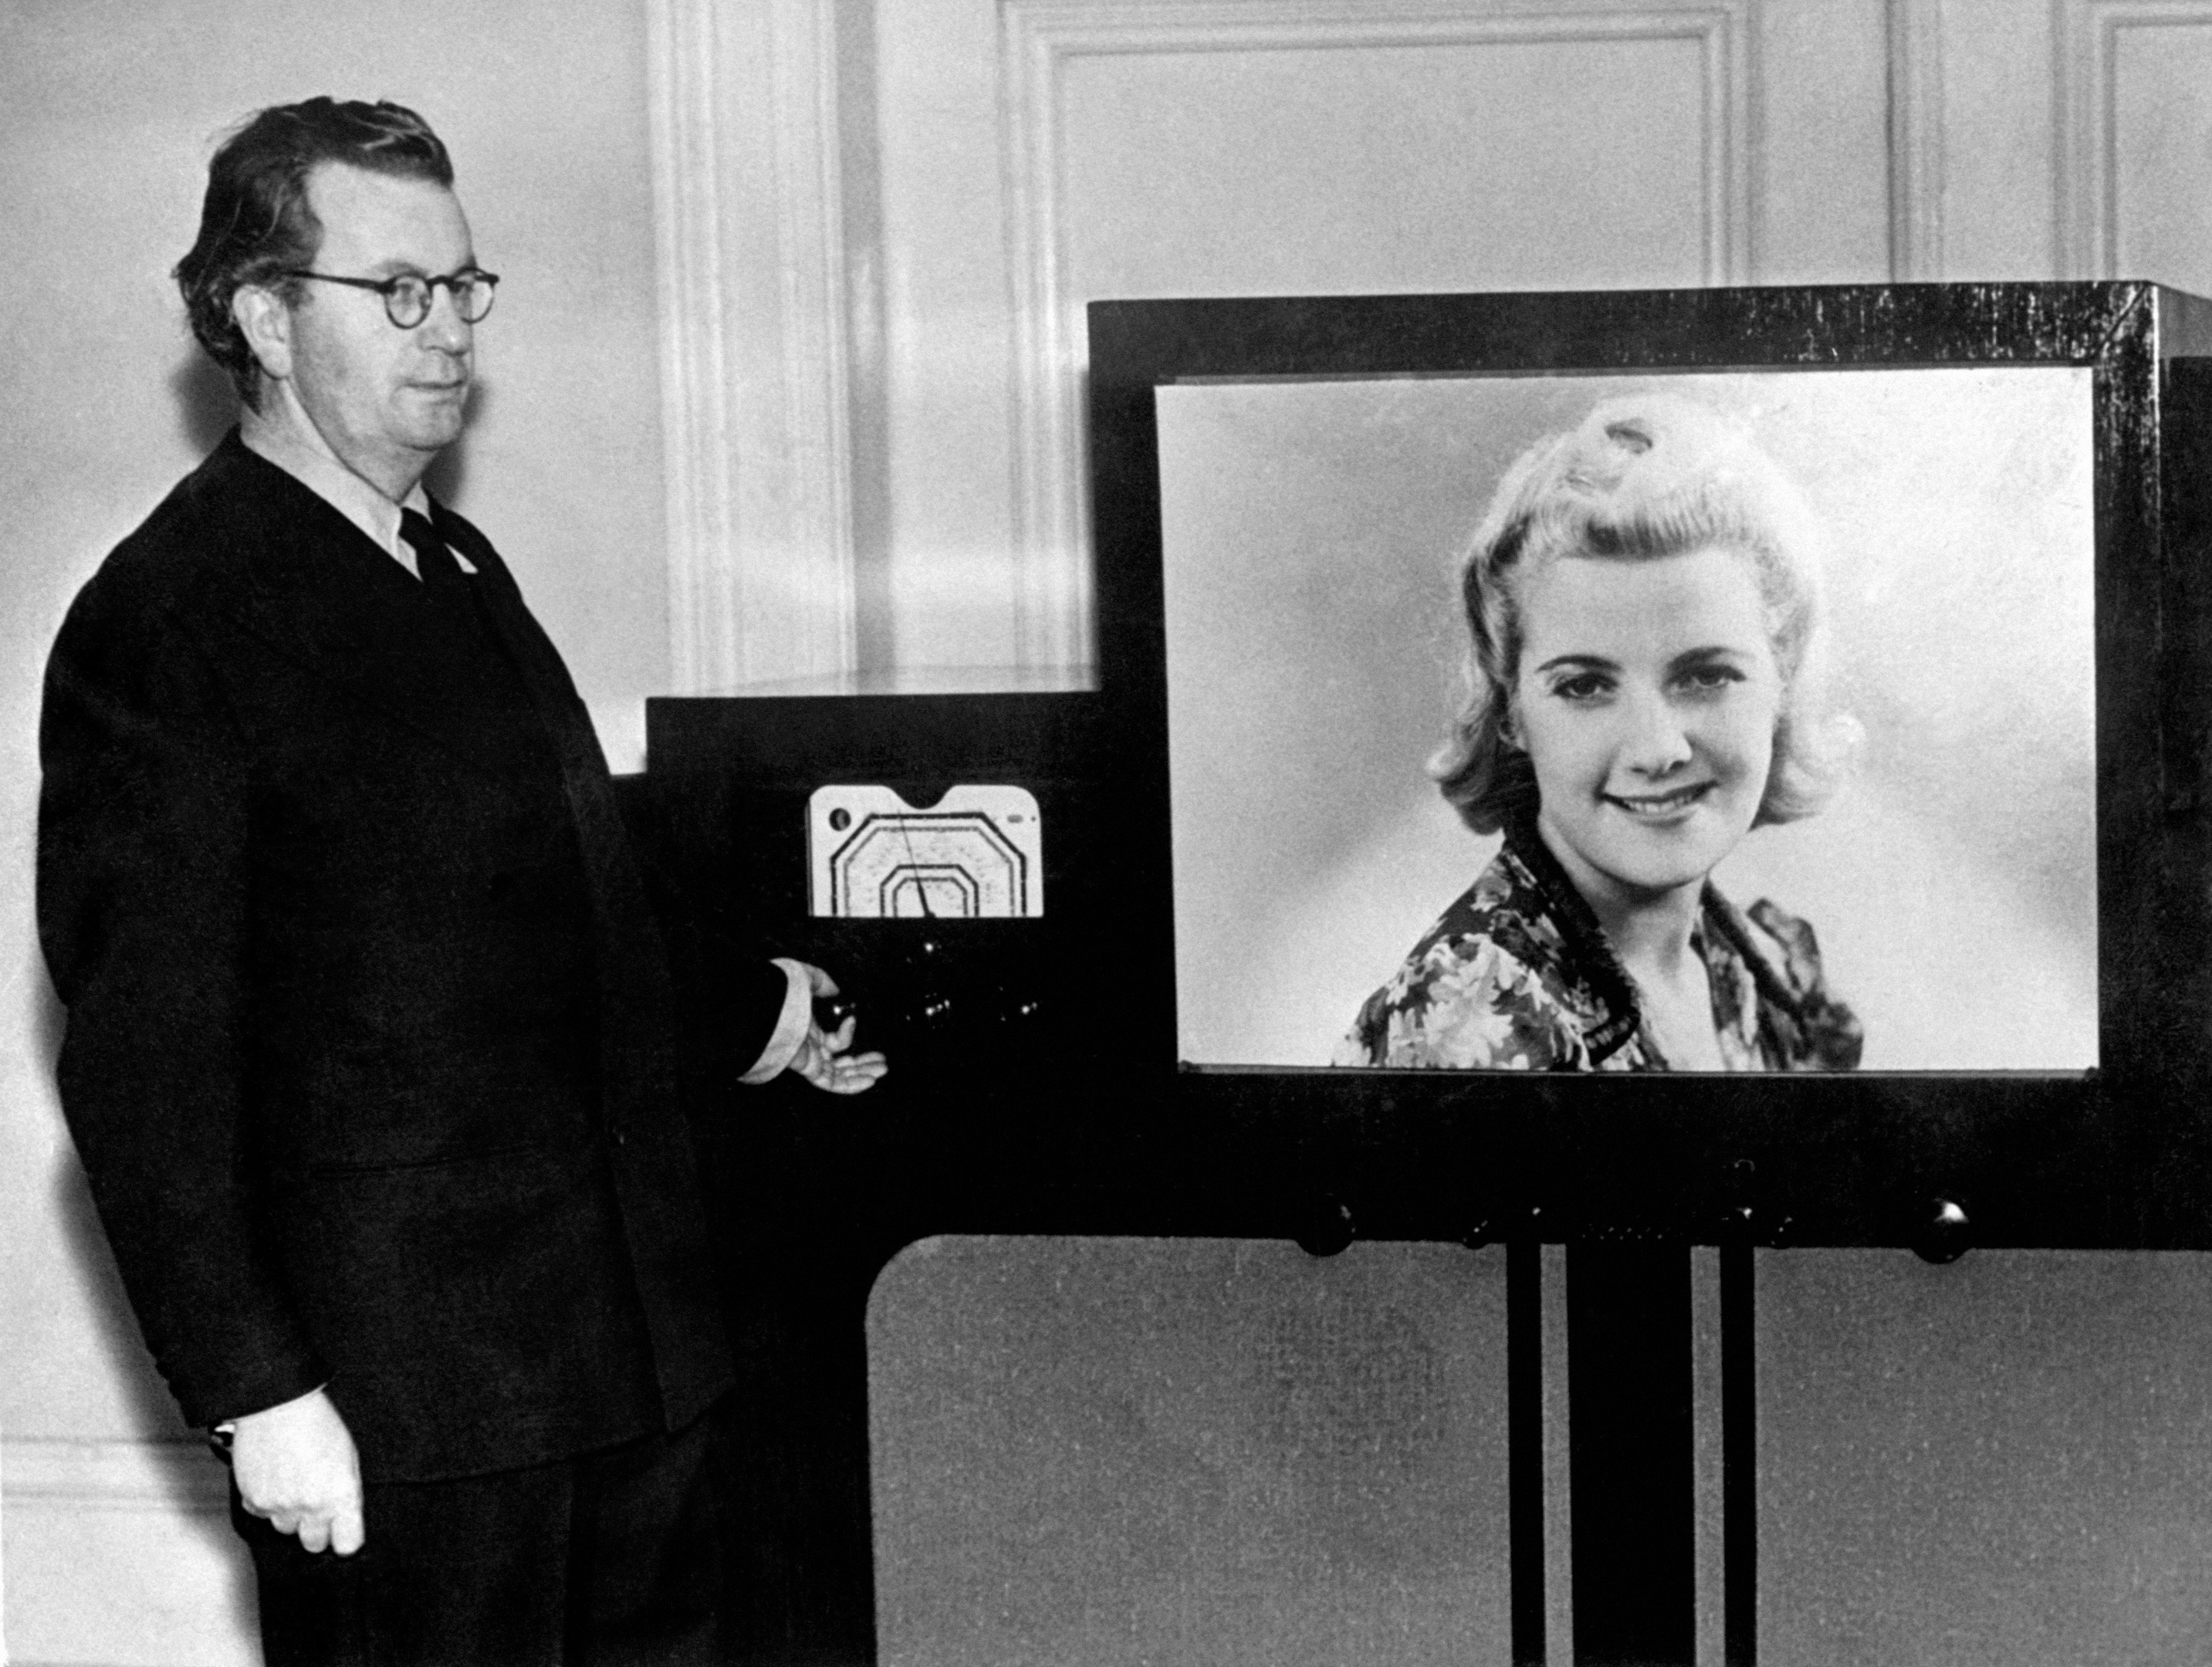 John Logie Baird, pioneer of television, perfected the full natural colour television